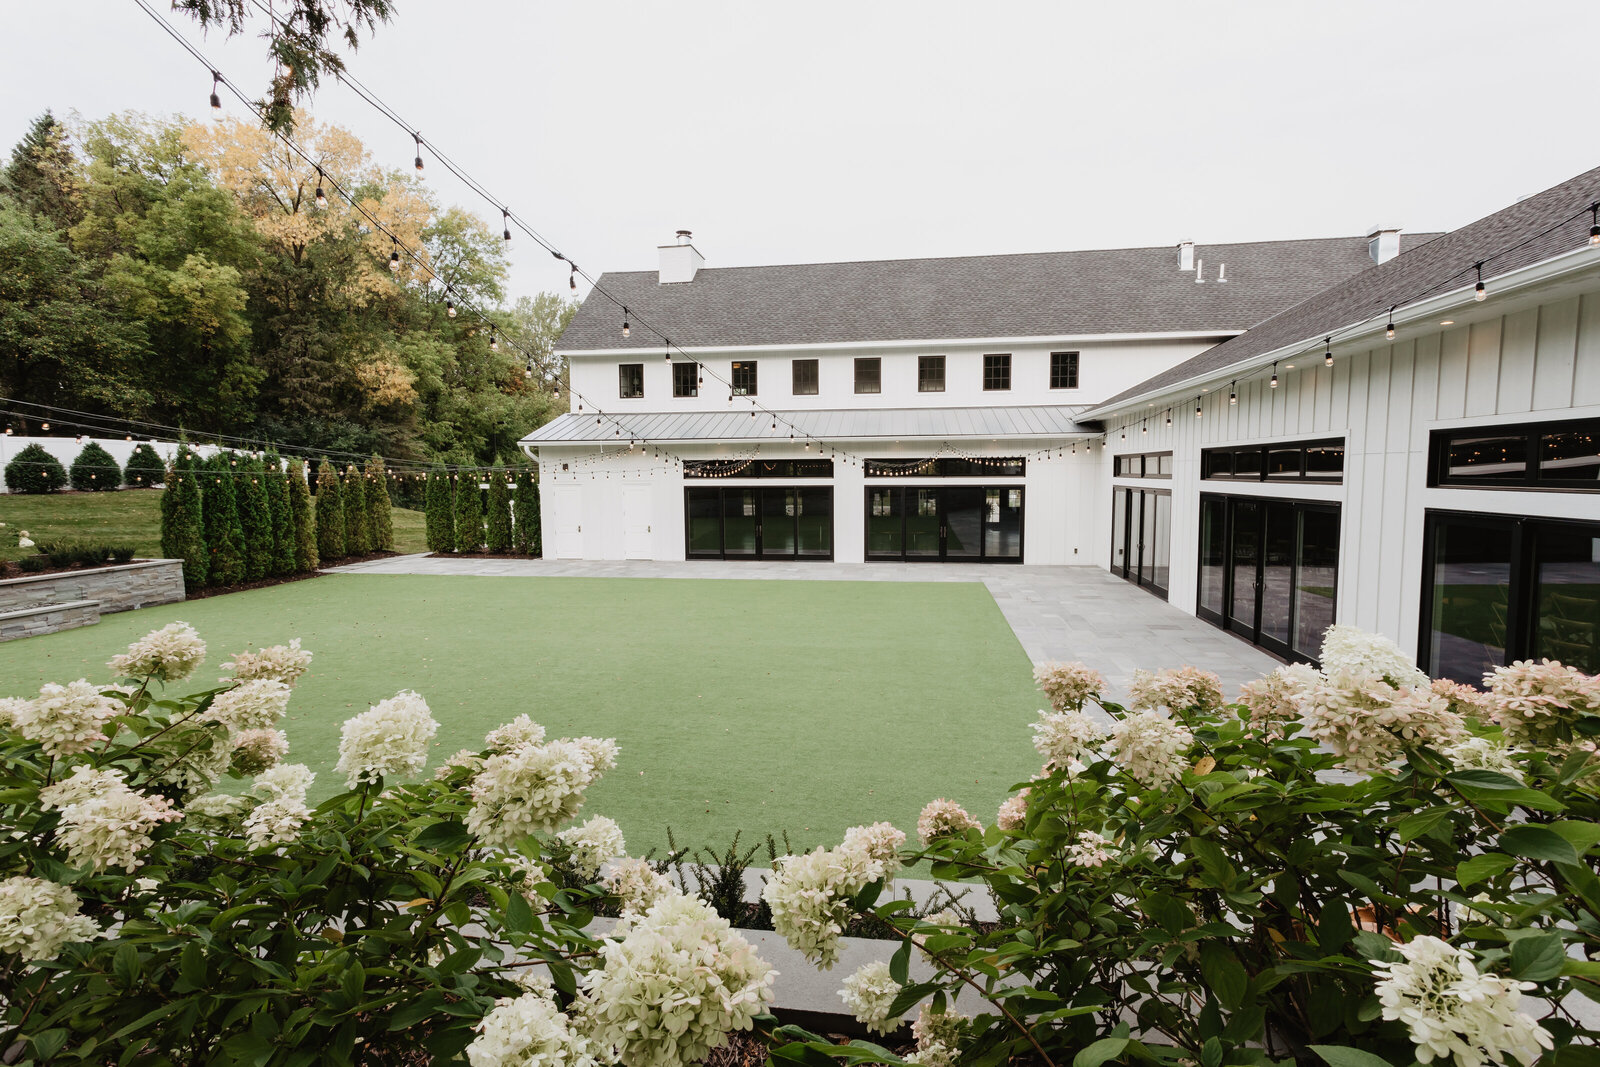 A large modern wedding venue white building with black accents and a green synthetic lawn, surrounded by lush greenery and white flowers. This venue is called Hutton House